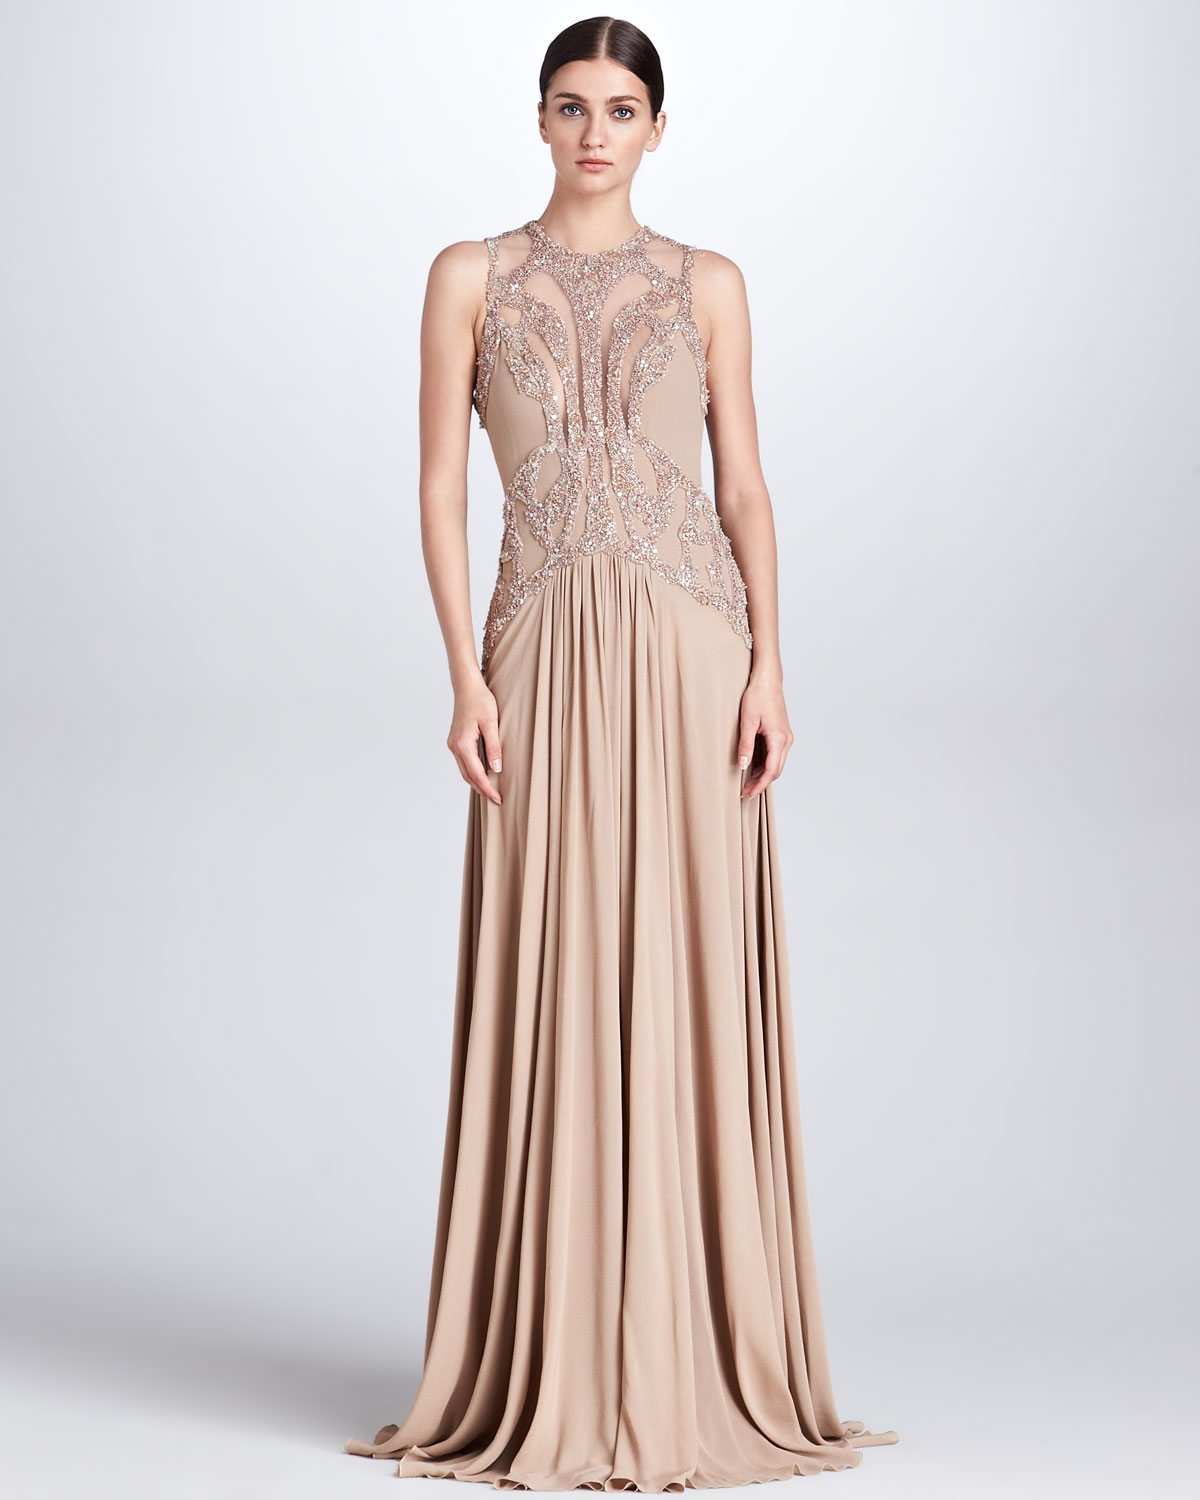 Lyst - Elie Saab Beaded Cutout Gown Bisque in Natural